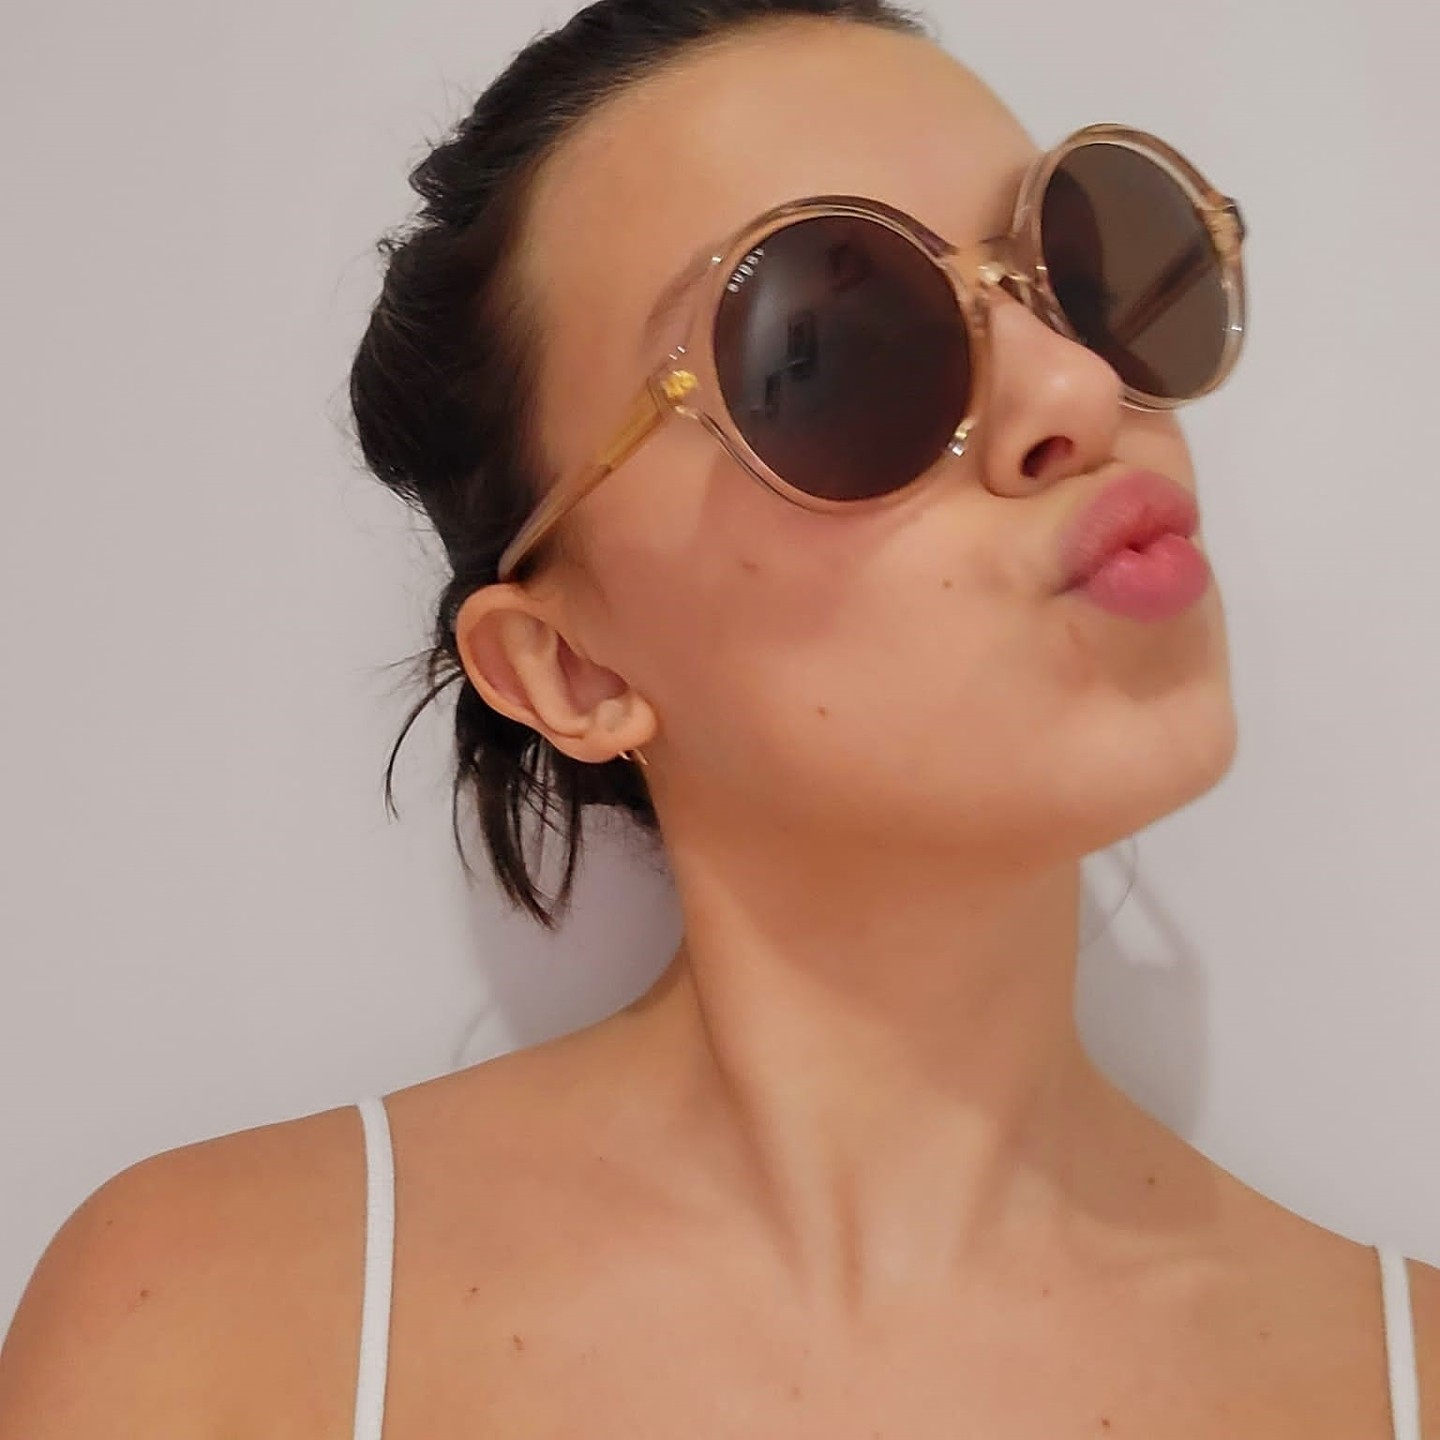 Millie Bobby Brown Selfie TheFappening.Pro 3 - Millie Bobby Brown Nude Eleven From “Stranger Things” (48 Photos)